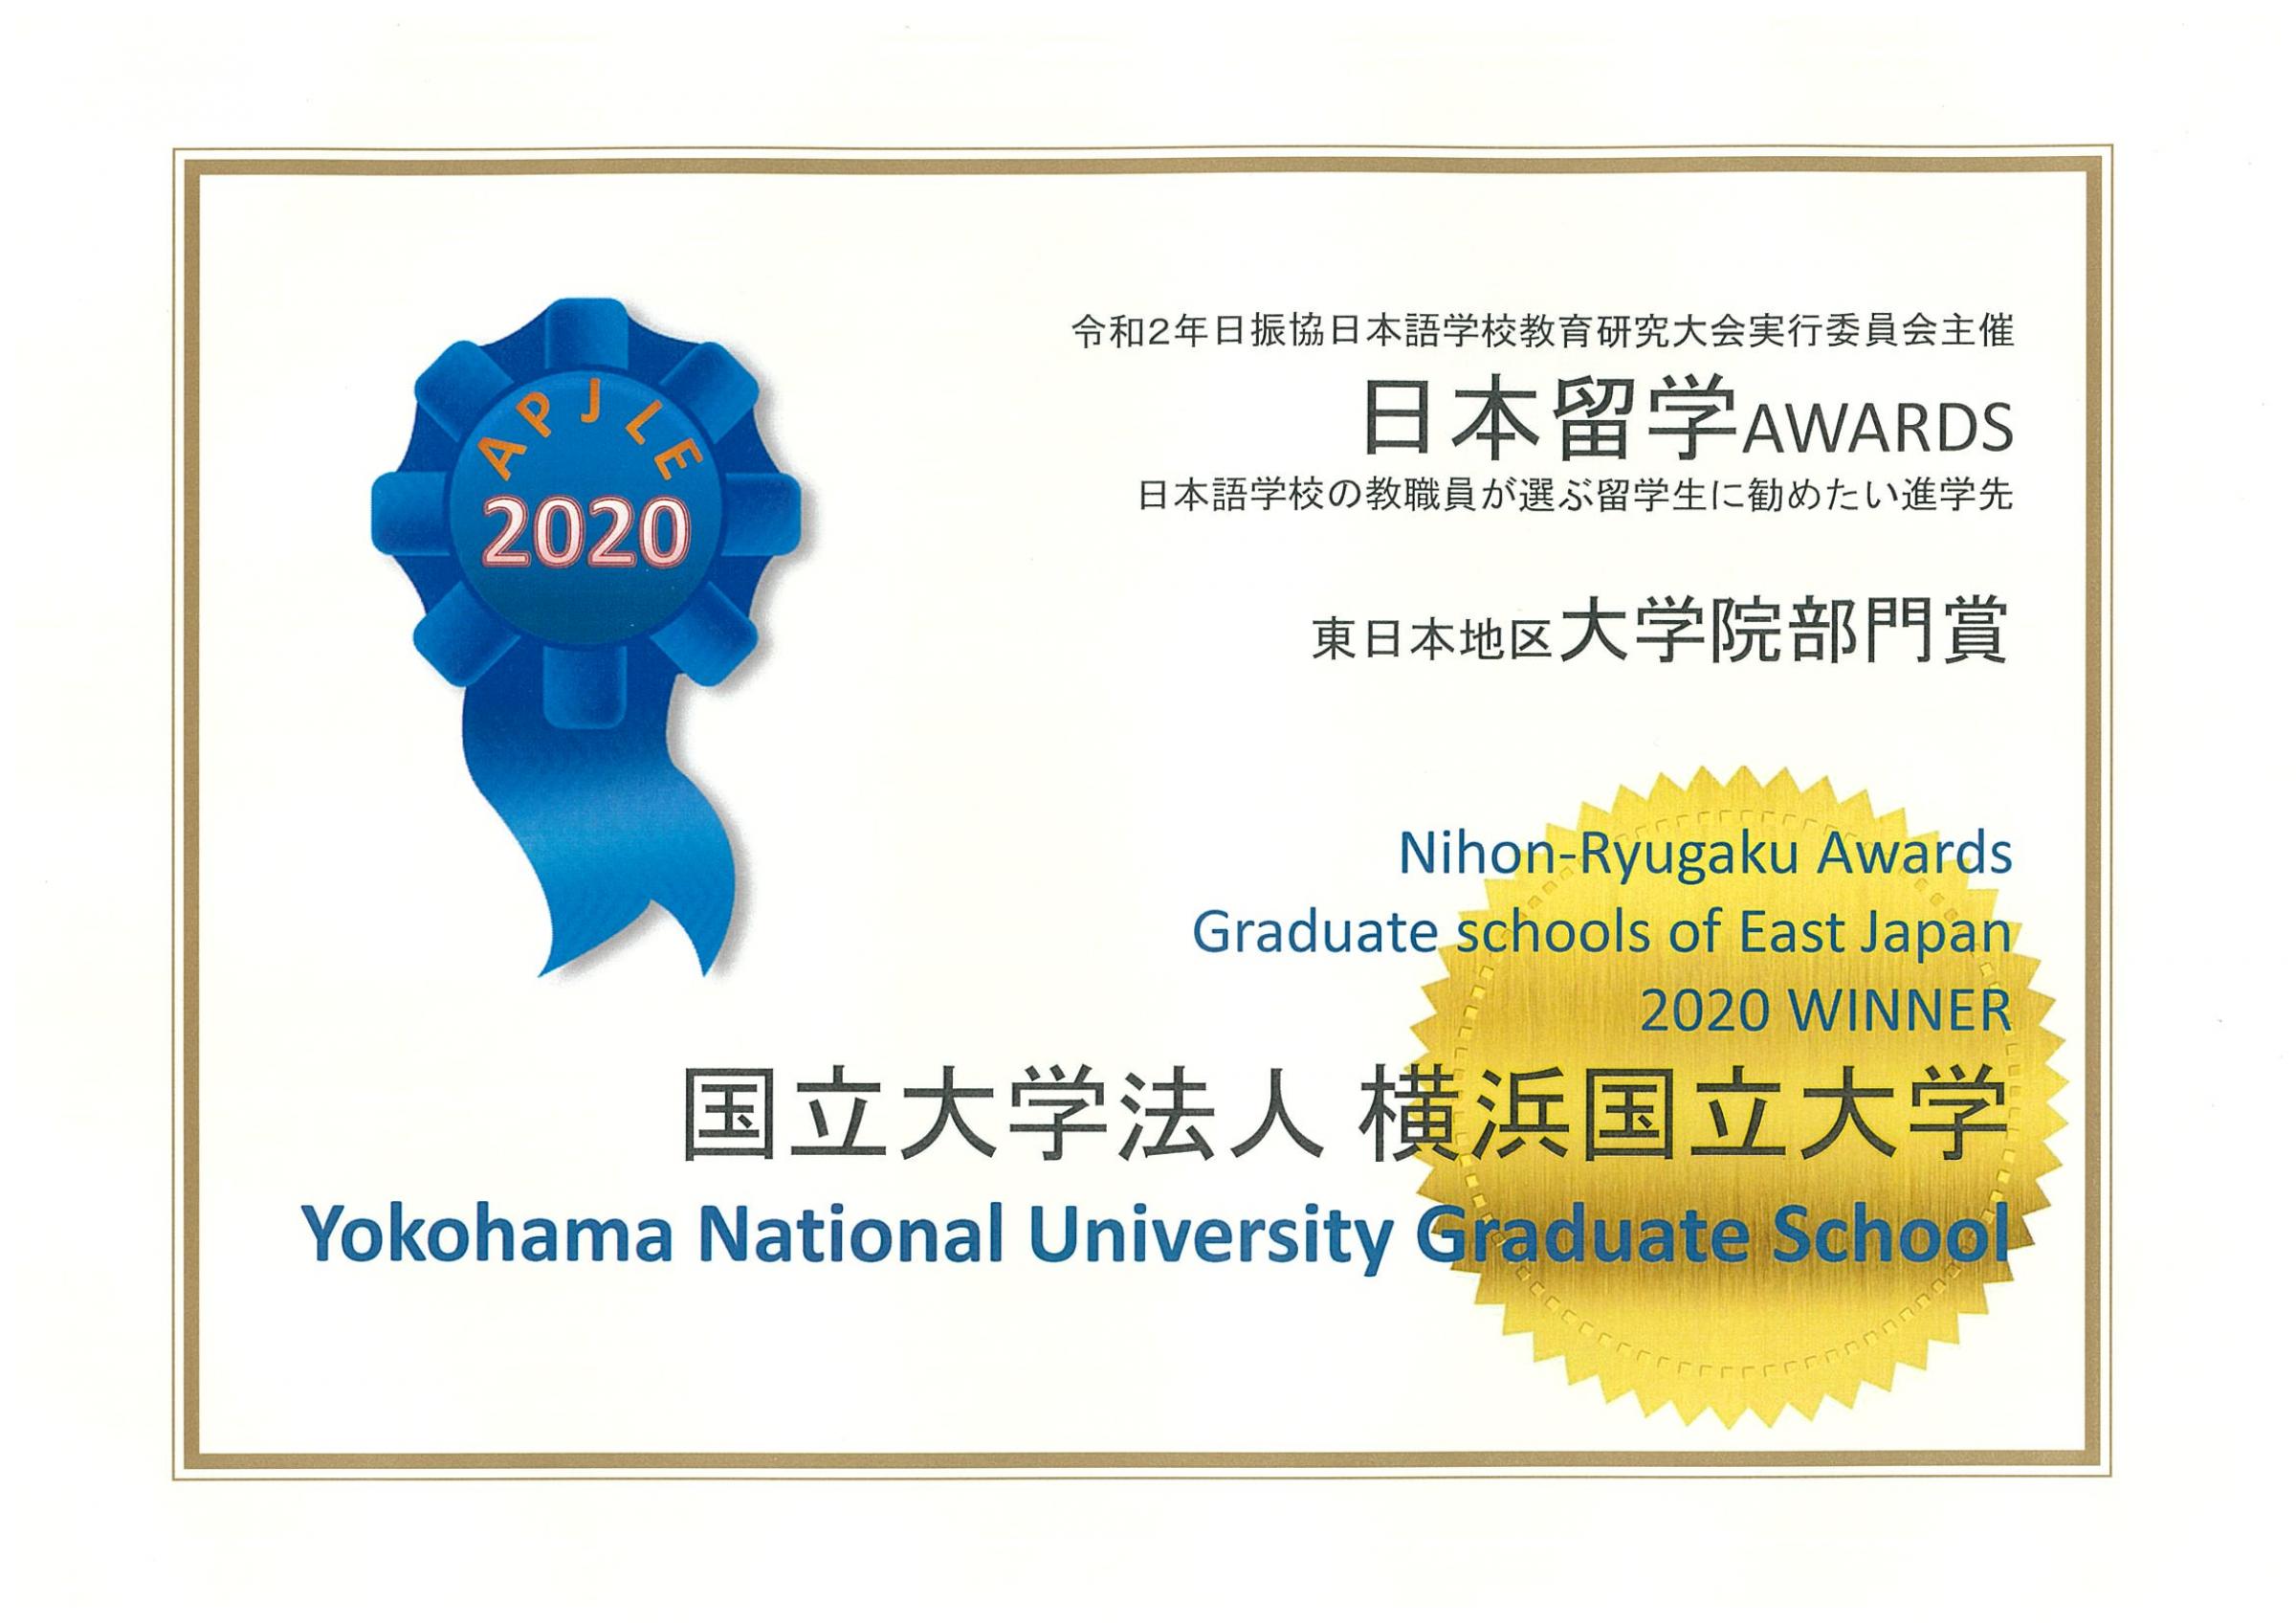 Grand prize in the category of Graduate schools of East Japan